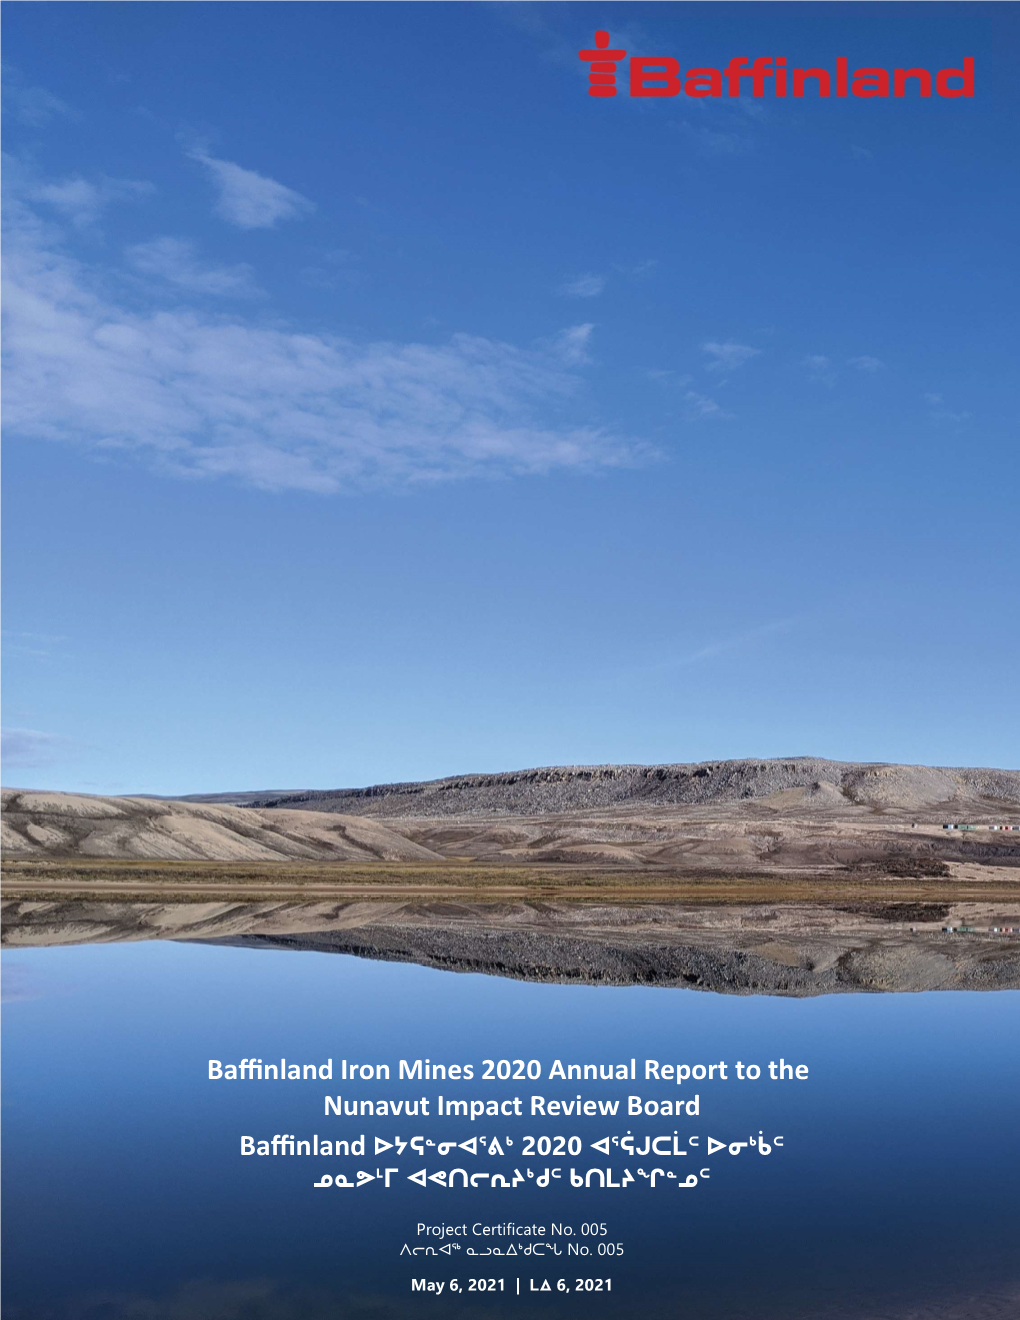 Baffinland Iron Mines 2020 Annual Report to the Nunavut Impact Review Board